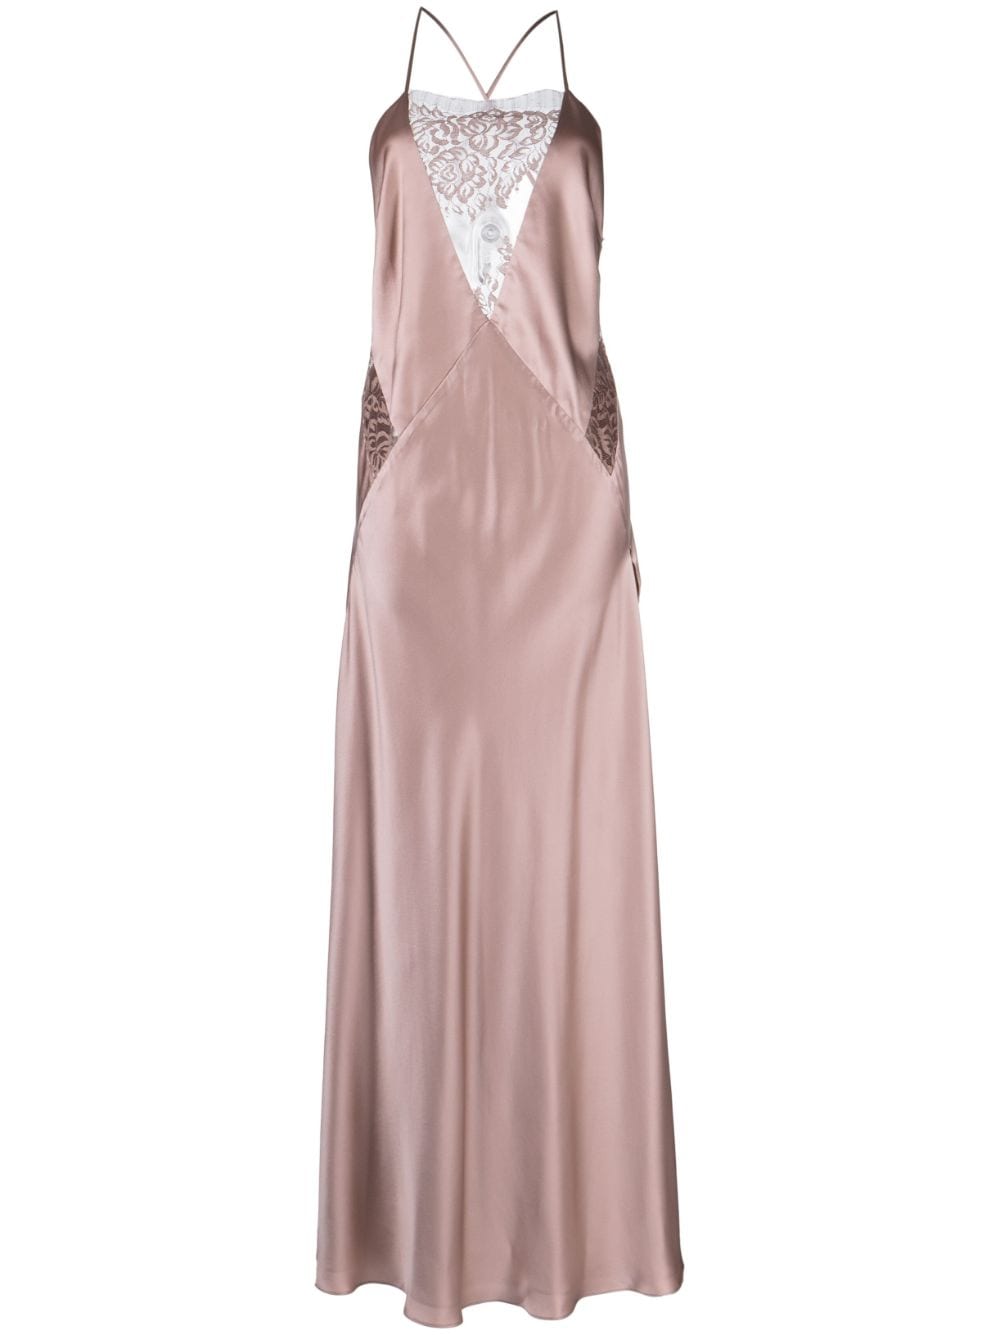 Image 1 of Michelle Mason lace-inset gown long sleeveless dress